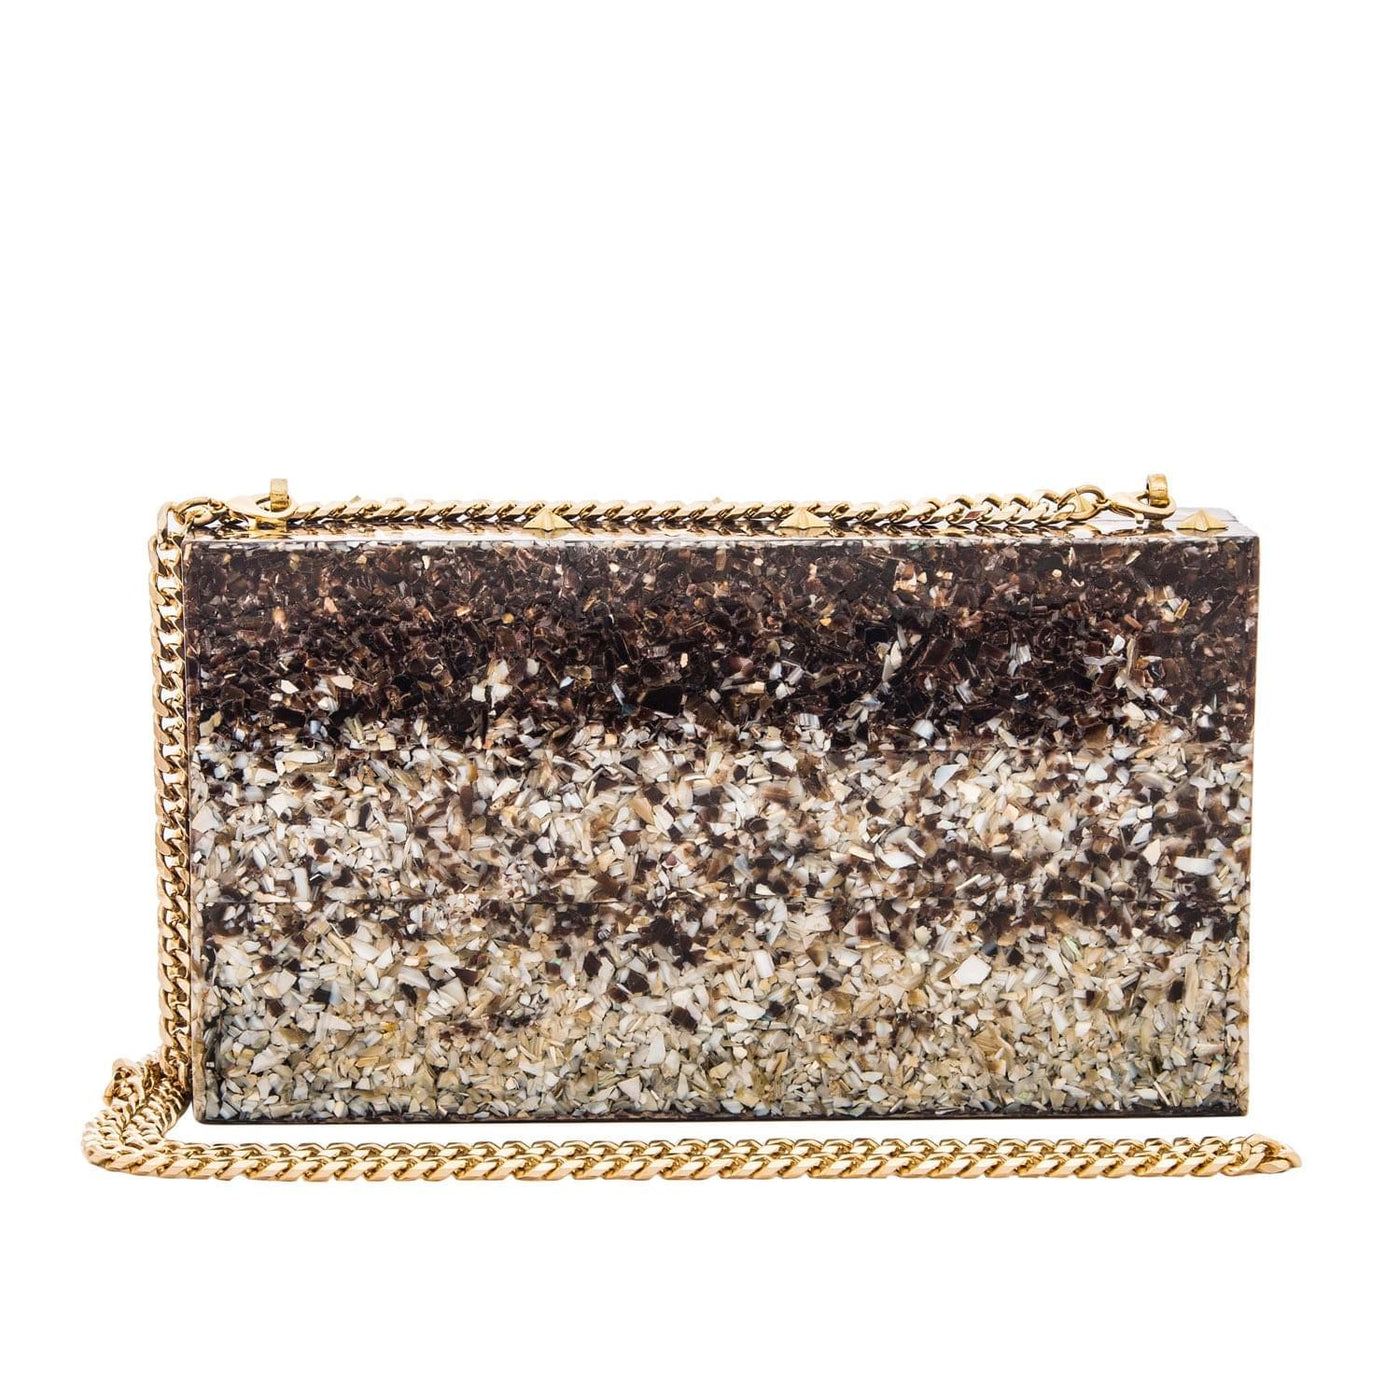 Asteria Clutch - Women's clutch bag in gold and shell